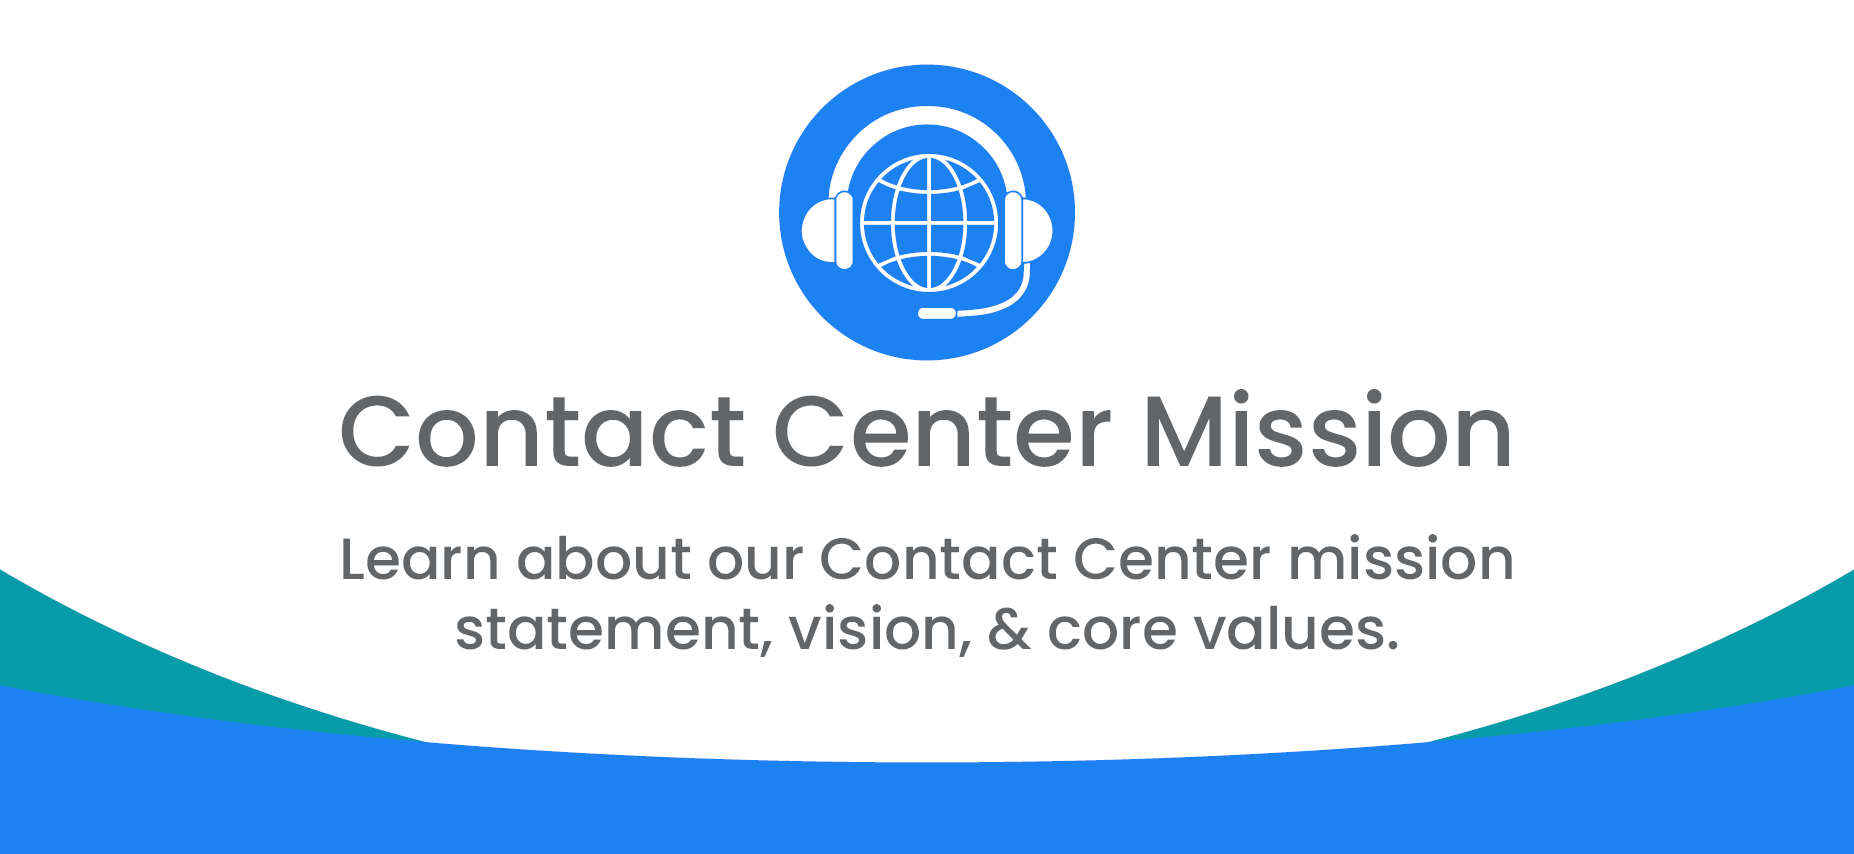 Contact Center Mission